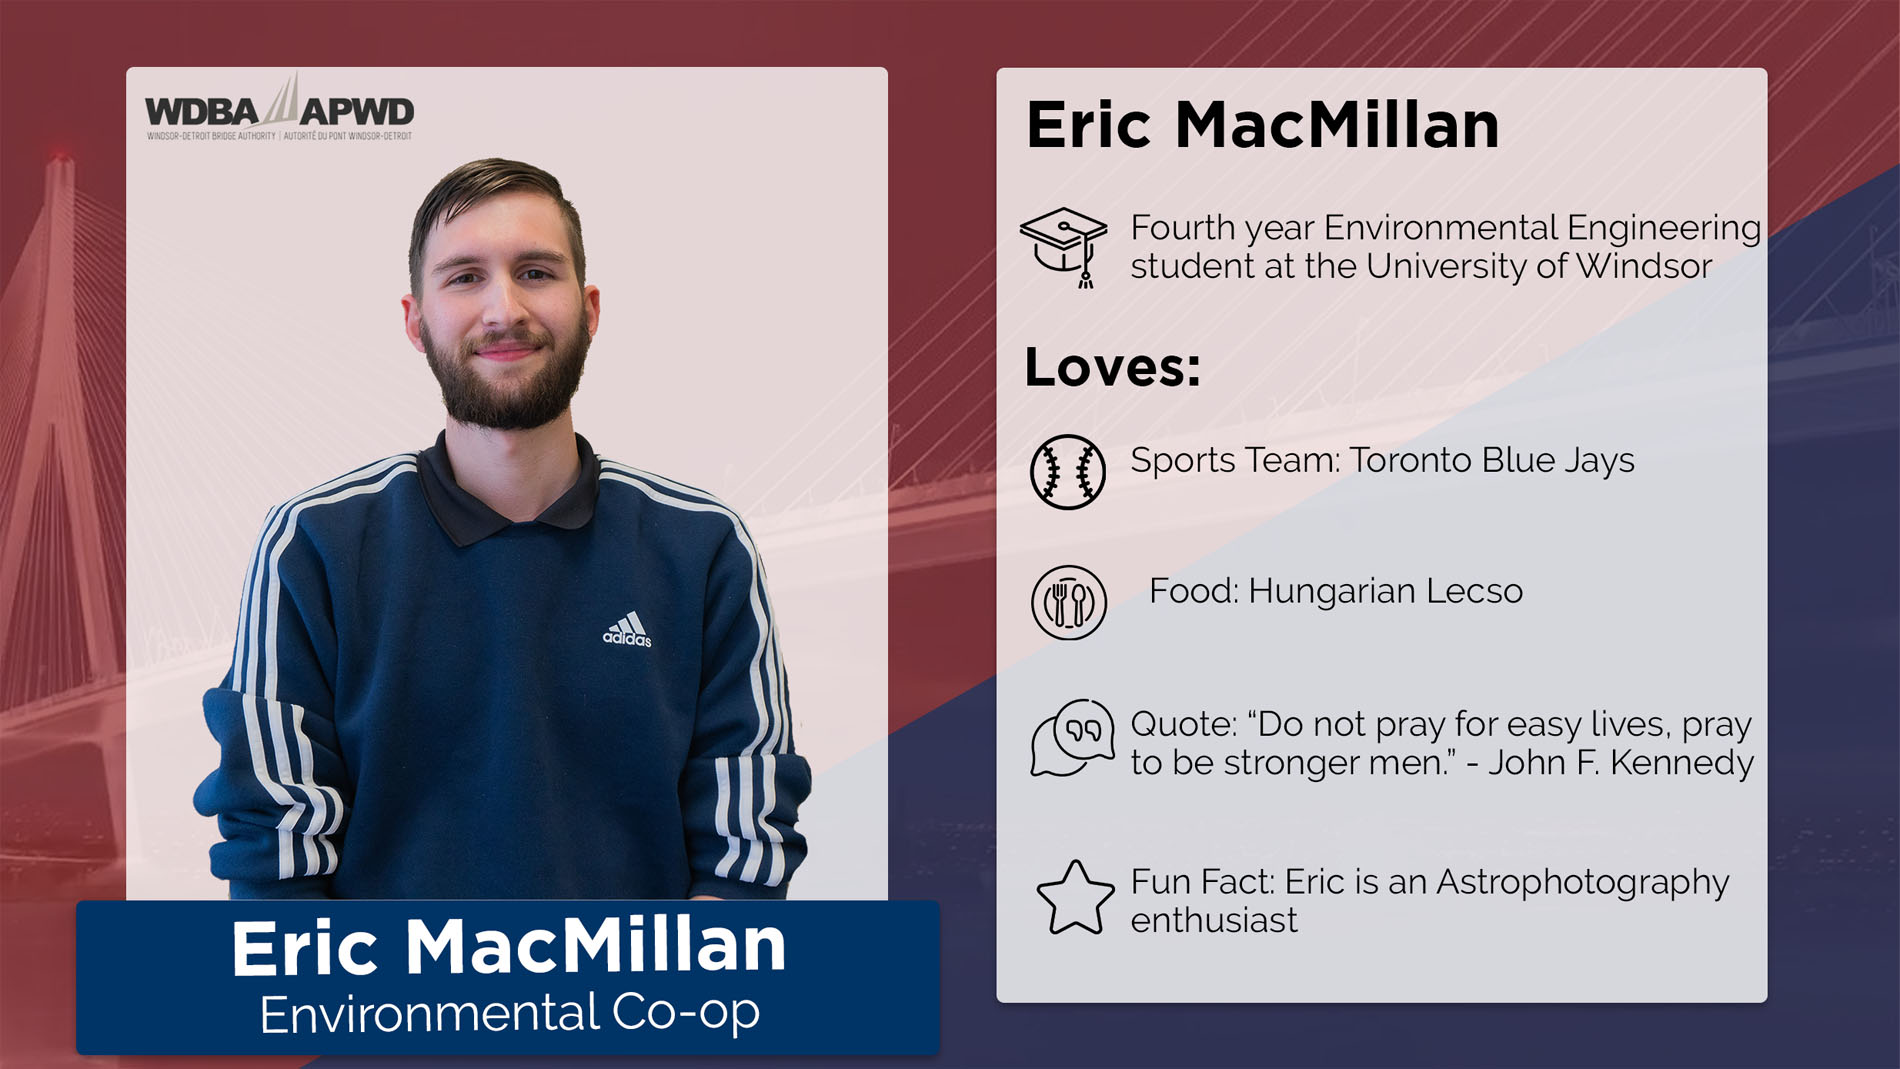 Eric MacMillan, Environmental Co-Op. Fourth year Environmental Engineering Student at the University of Windsor. Loves: Sports Team: Toronto Blue Jays. Food: Hungarian Lecso. Quote: "Do not pray for easy lives, pray to be stronger men" - JFK. Fun Fact: Eric is an Astrophotography enthusiast. 